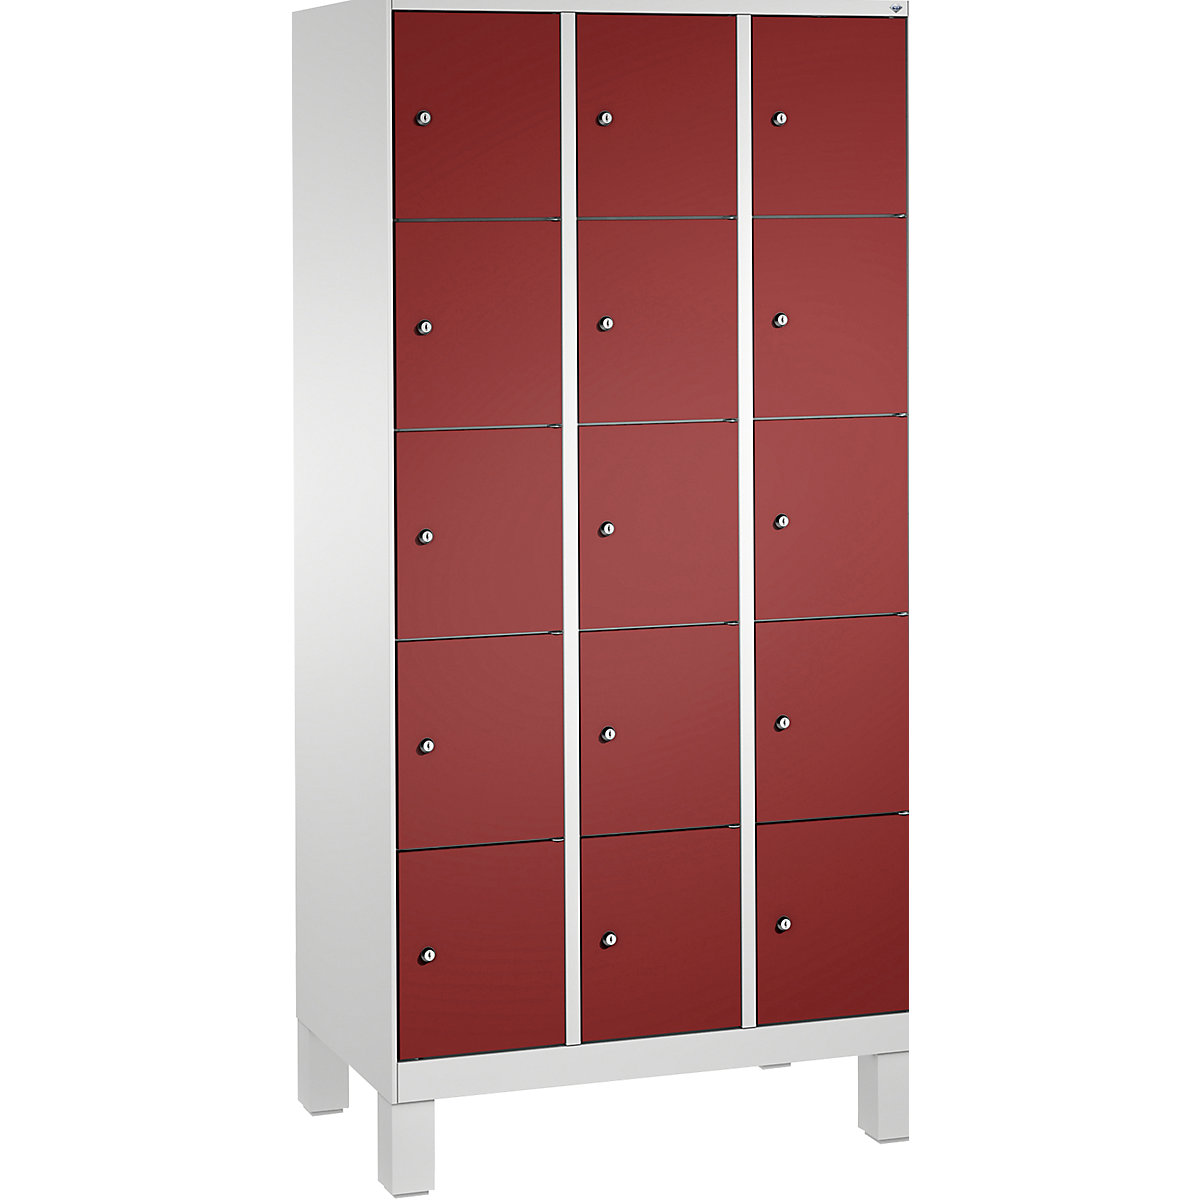 EVOLO locker unit, with feet – C+P, 3 compartments, 5 shelf compartments each, compartment width 300 mm, light grey / ruby red-13